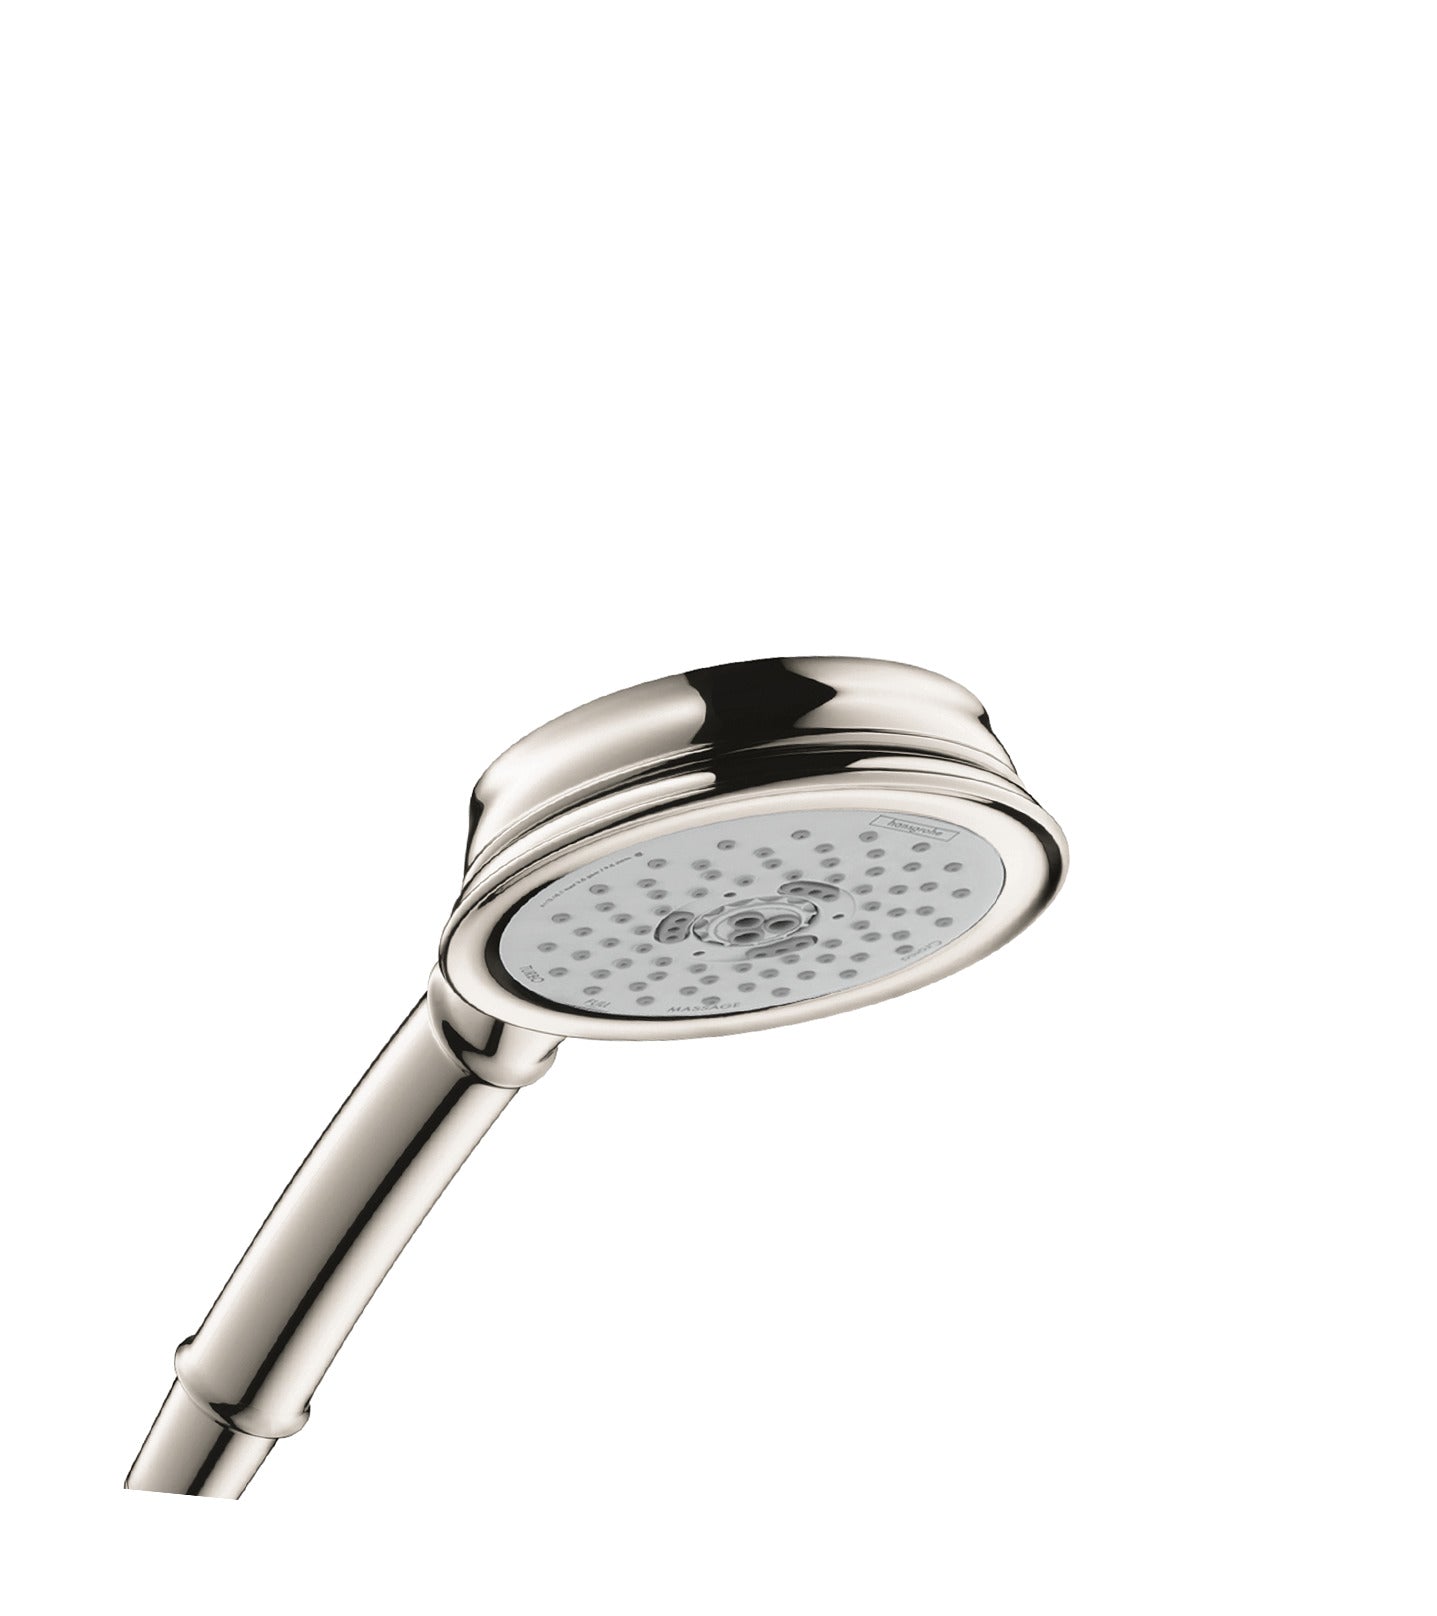 HANSGROHE 04072830 Polished Nickel Croma 100 Classic Classic Handshower 2.5 GPM